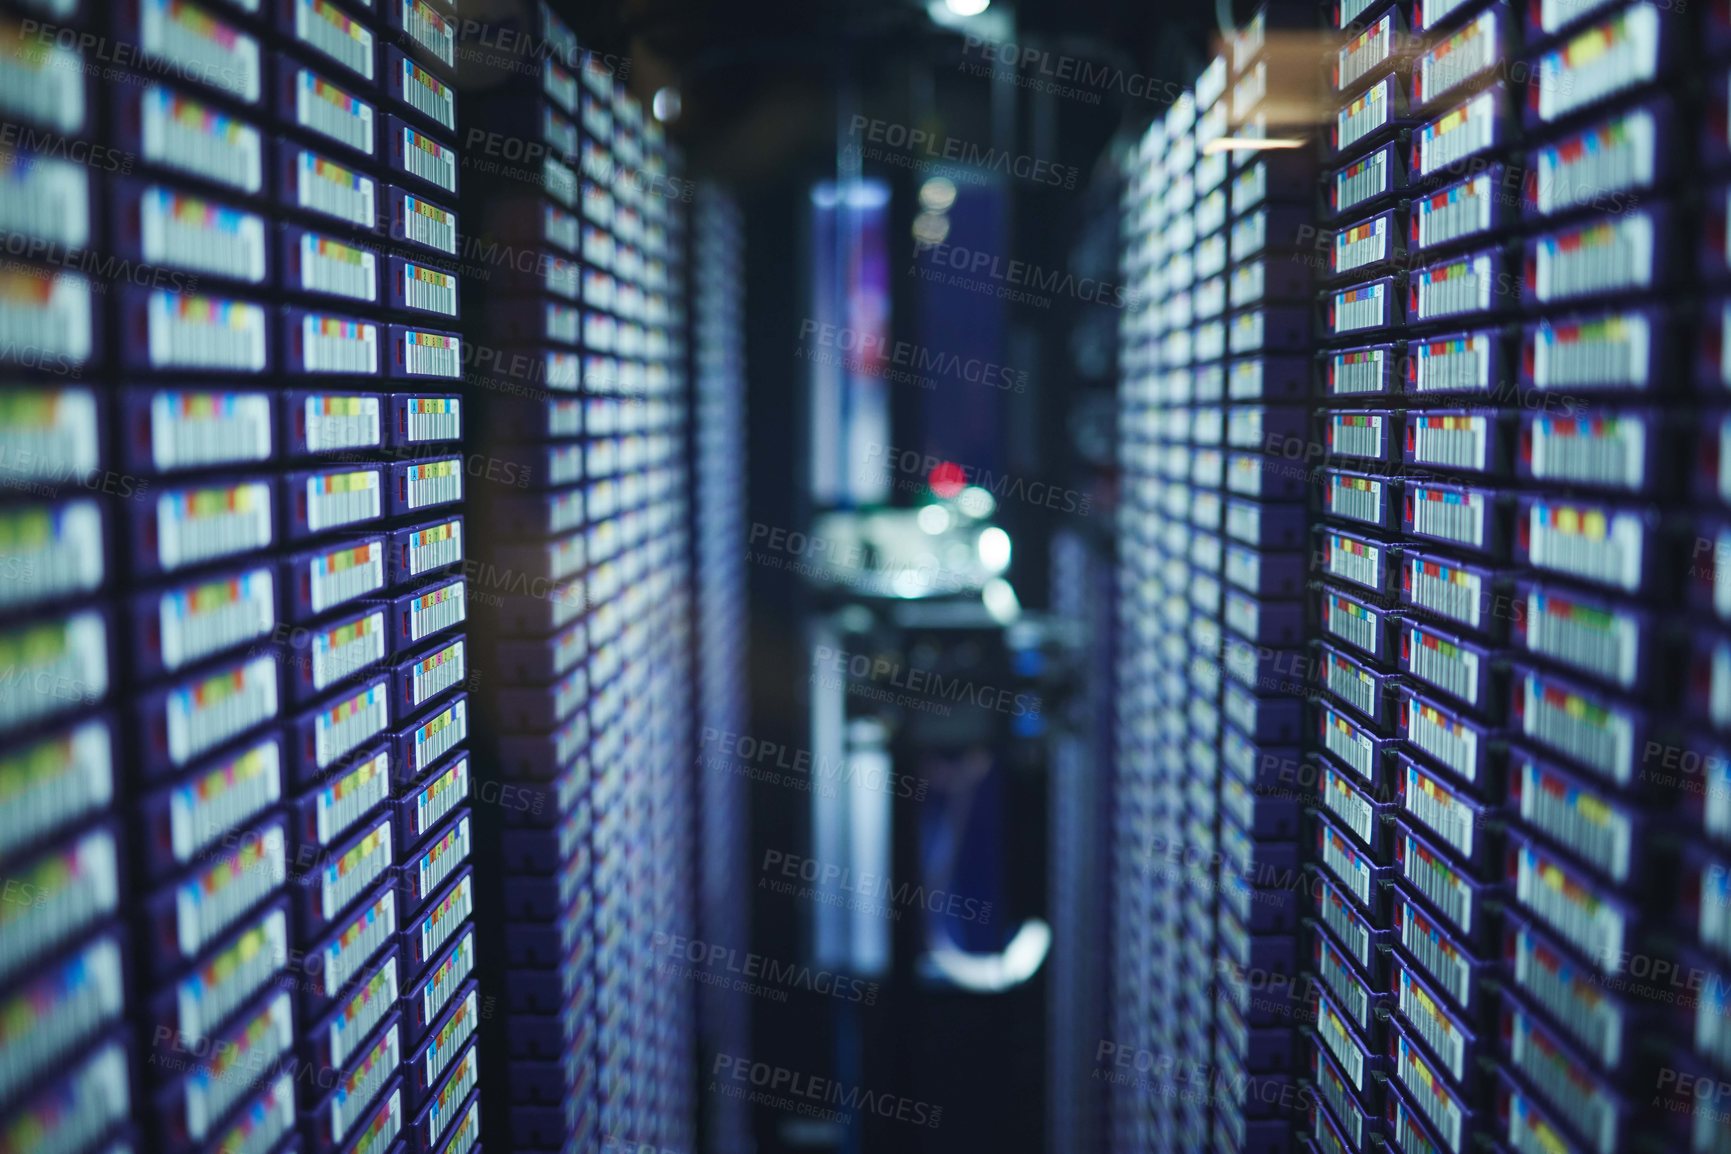 Buy stock photo Shot of electronic equipment in a server room